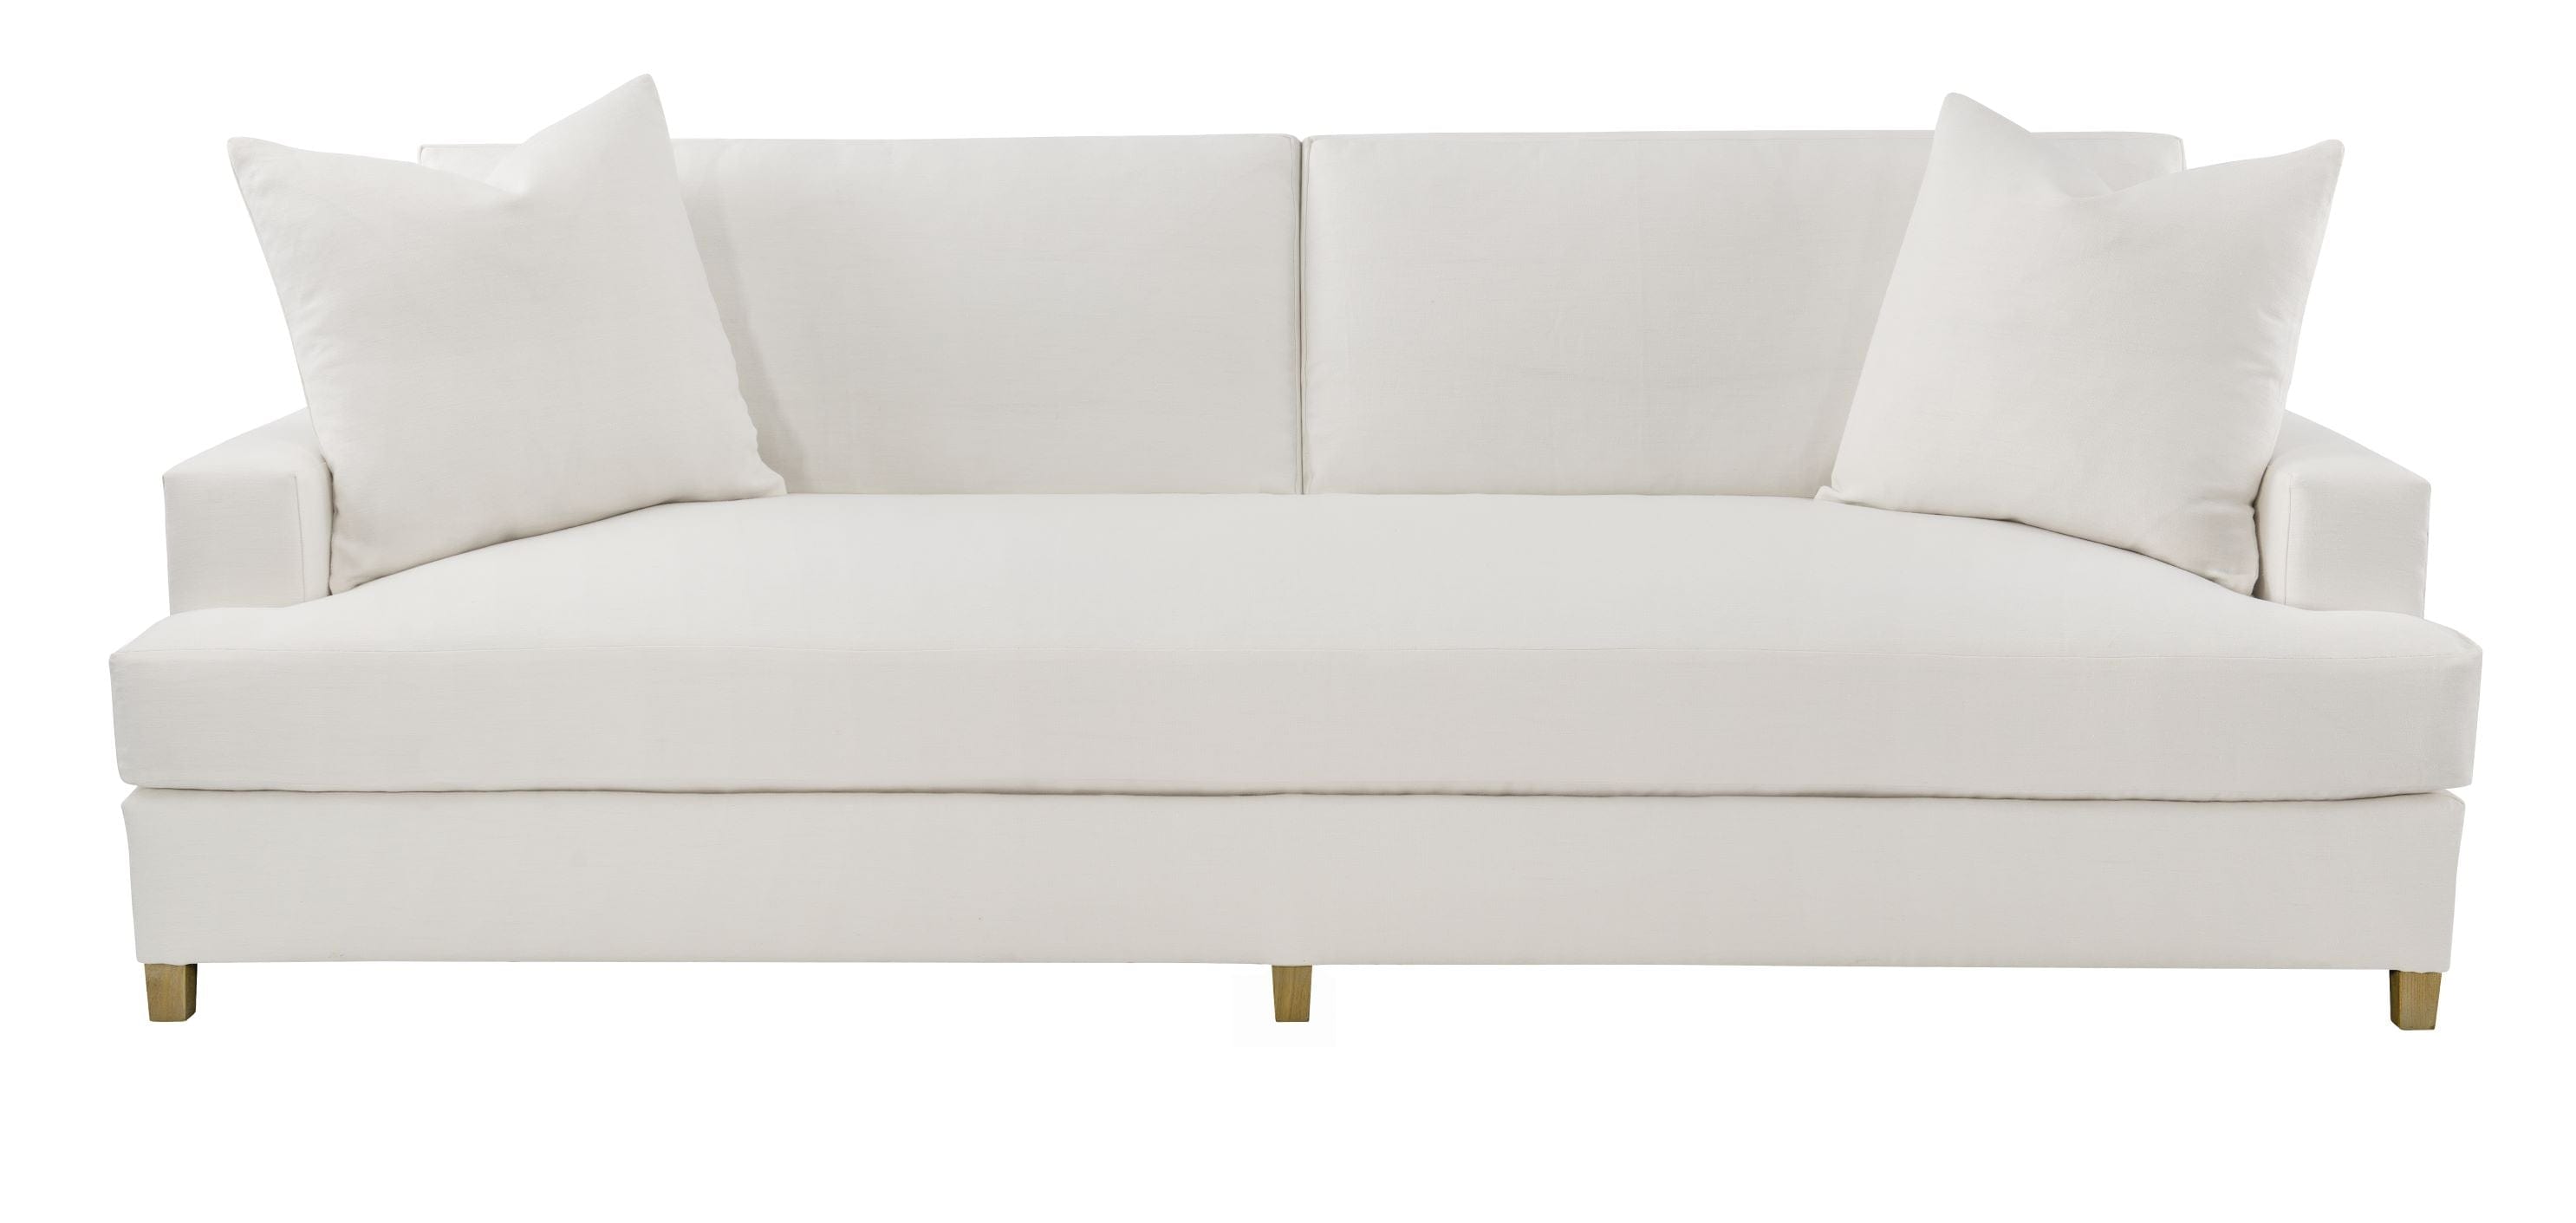 Jacques Sofa By Hickory Chair Ltd Suzanne Kasler Upholstery Collecti English Country Home